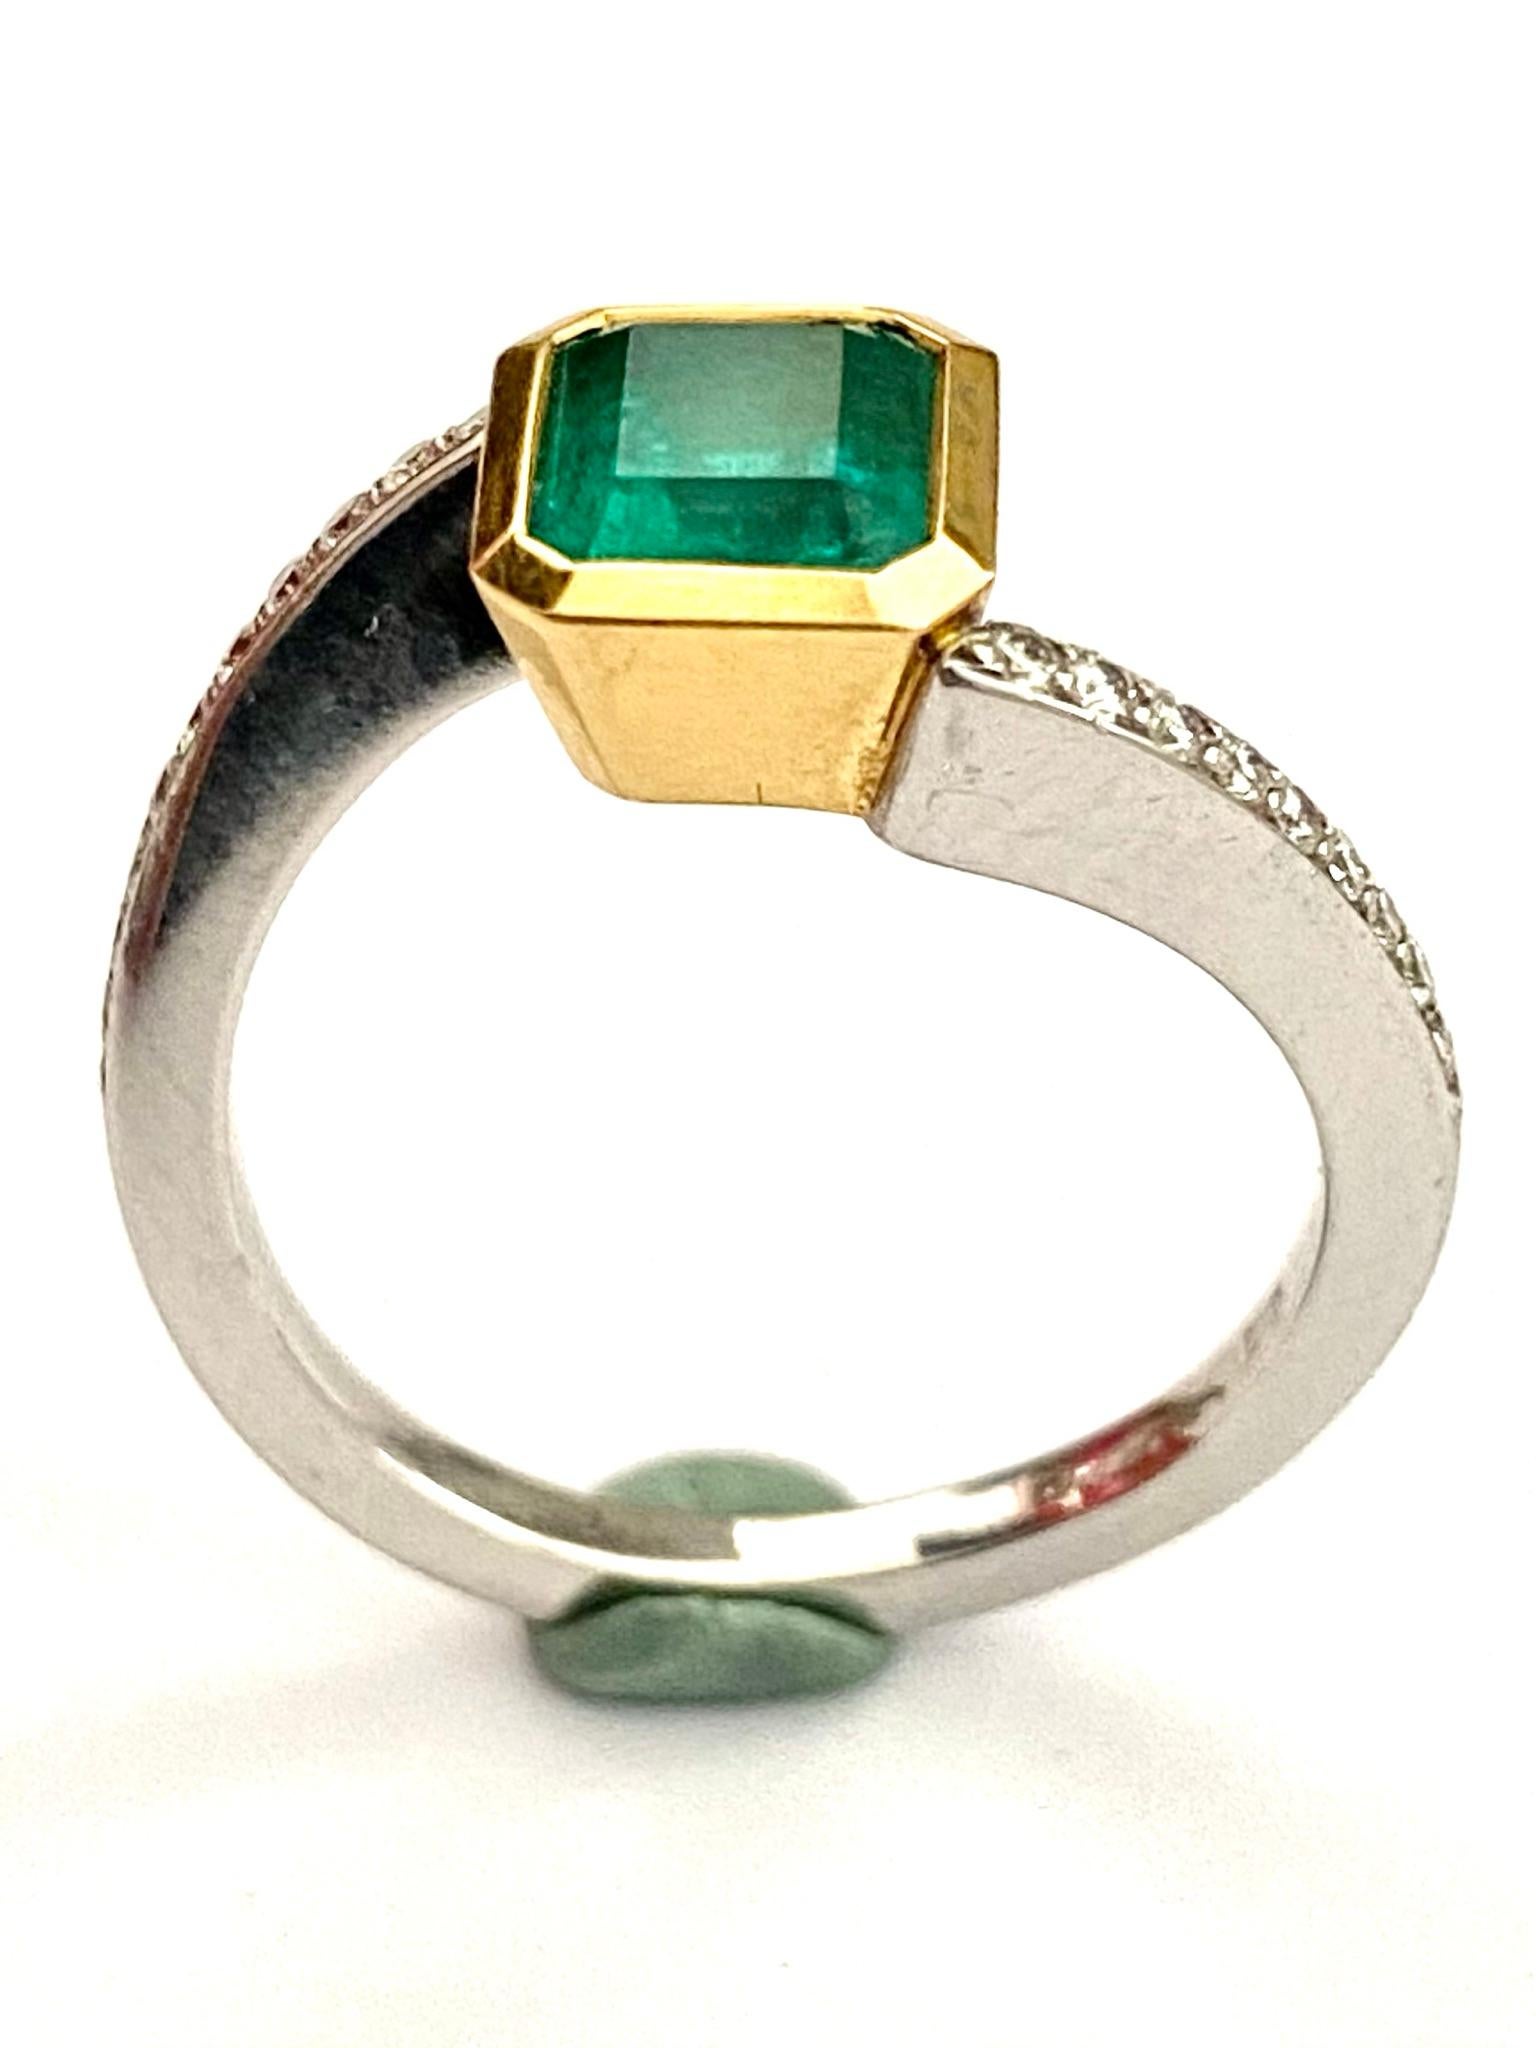 One (1) 18 Karat Yellow and White Gold Ring, Stamped: 750  and a V with Crown 
Center stone:
Natural Beryl, Emerald, Fine Color Quality.
Origine: Colombia   Weight ofthe Emerald: 1.30 ct.
Side Stones: 20 = 0.15 ct.  VS- F-G.
Weight of the Ring: 